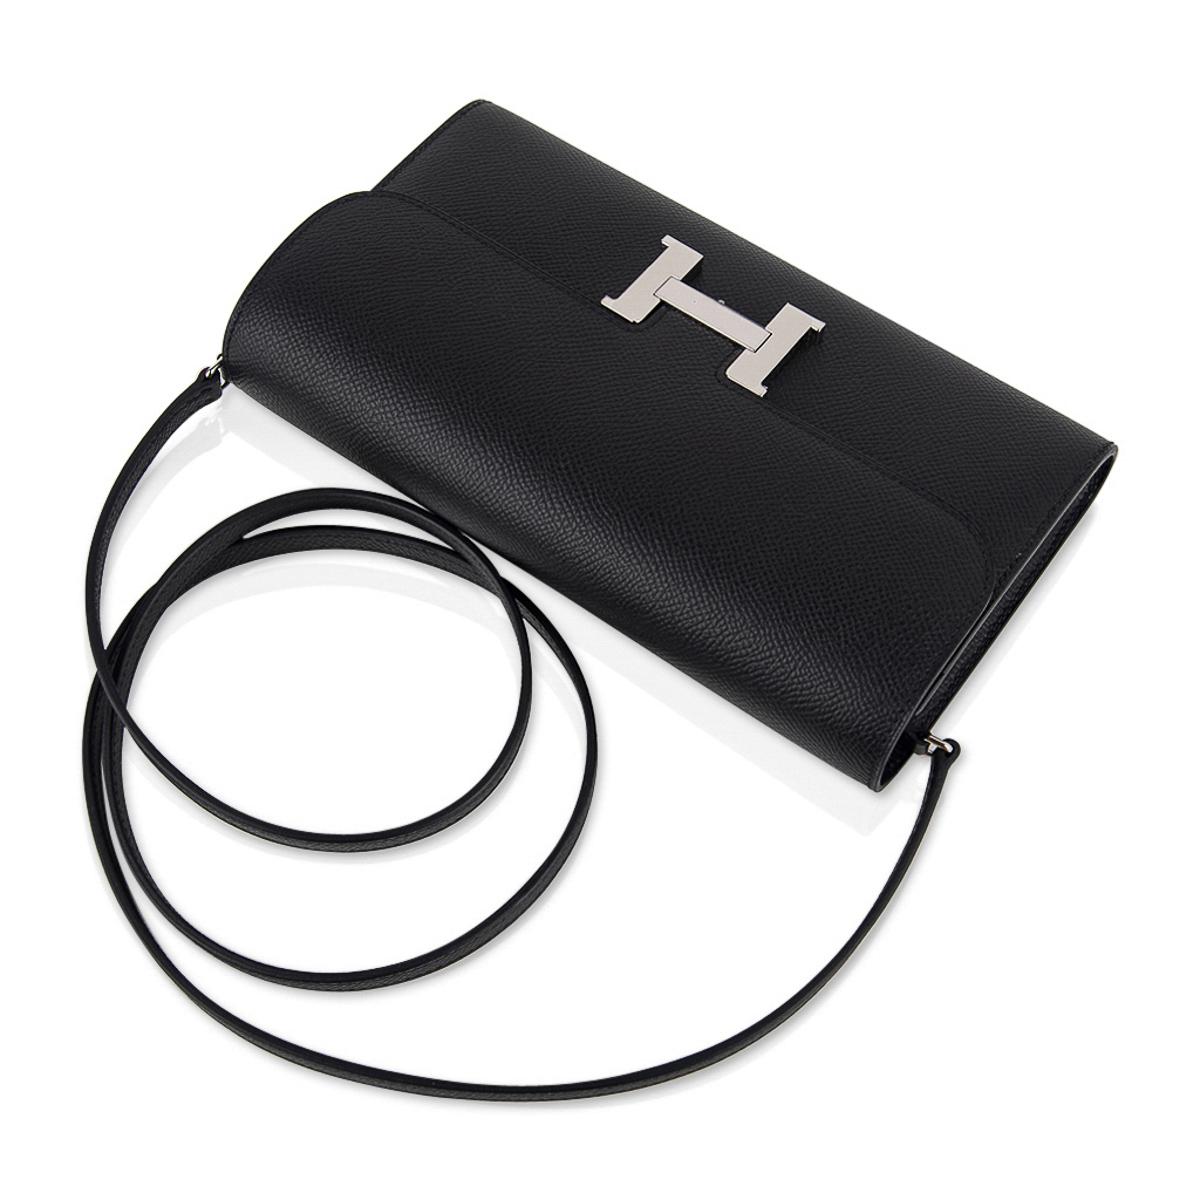 hermes constance wallet on chain